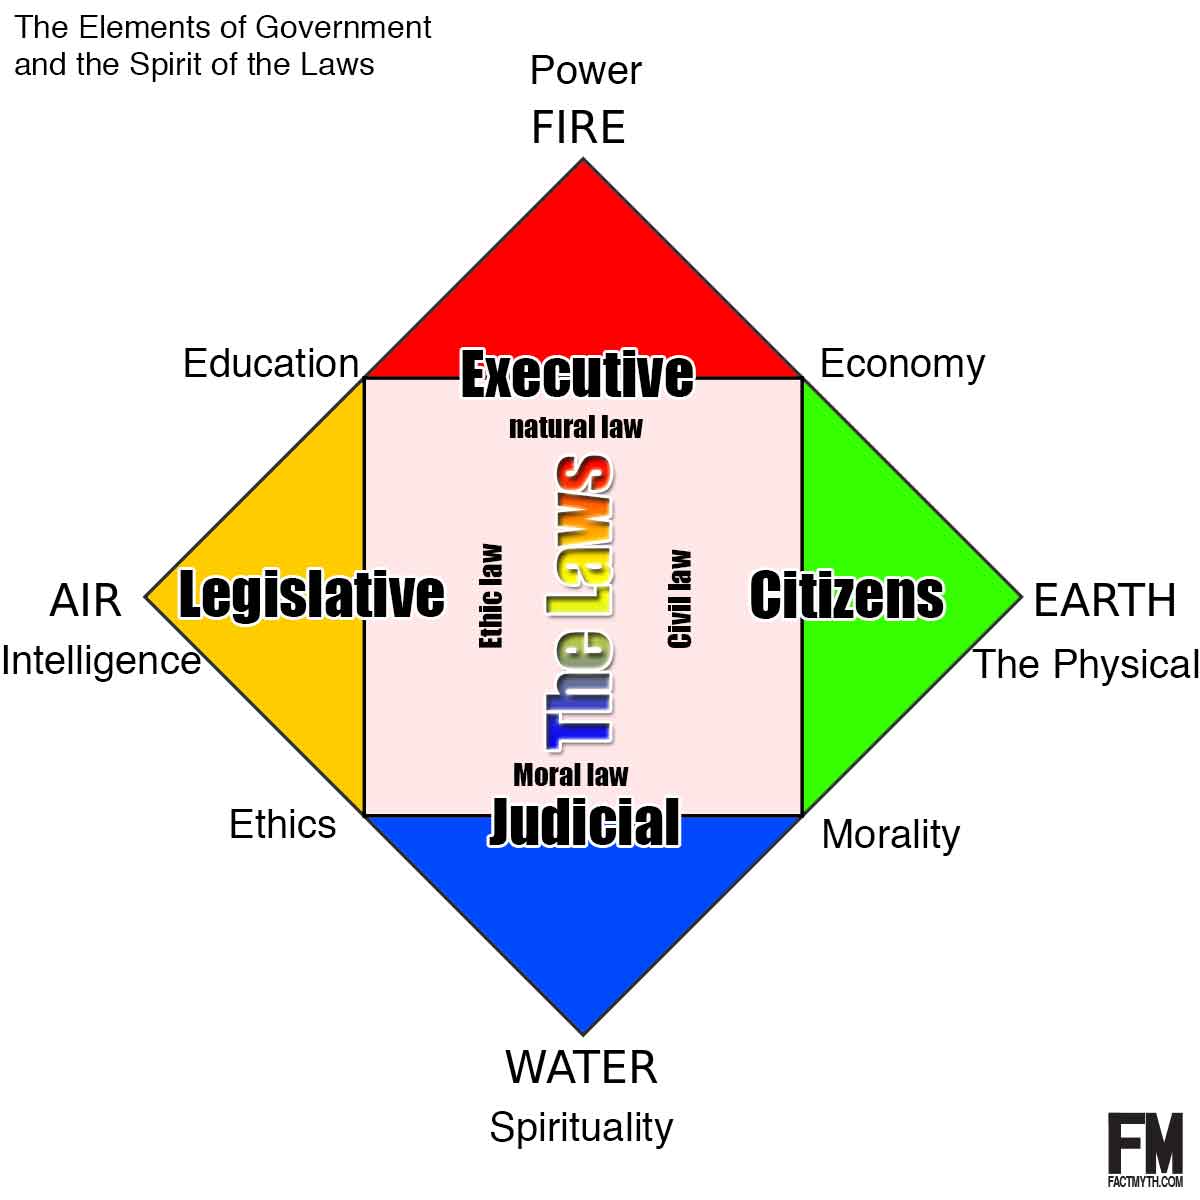 The Elements of Government and the Spirit of the Laws